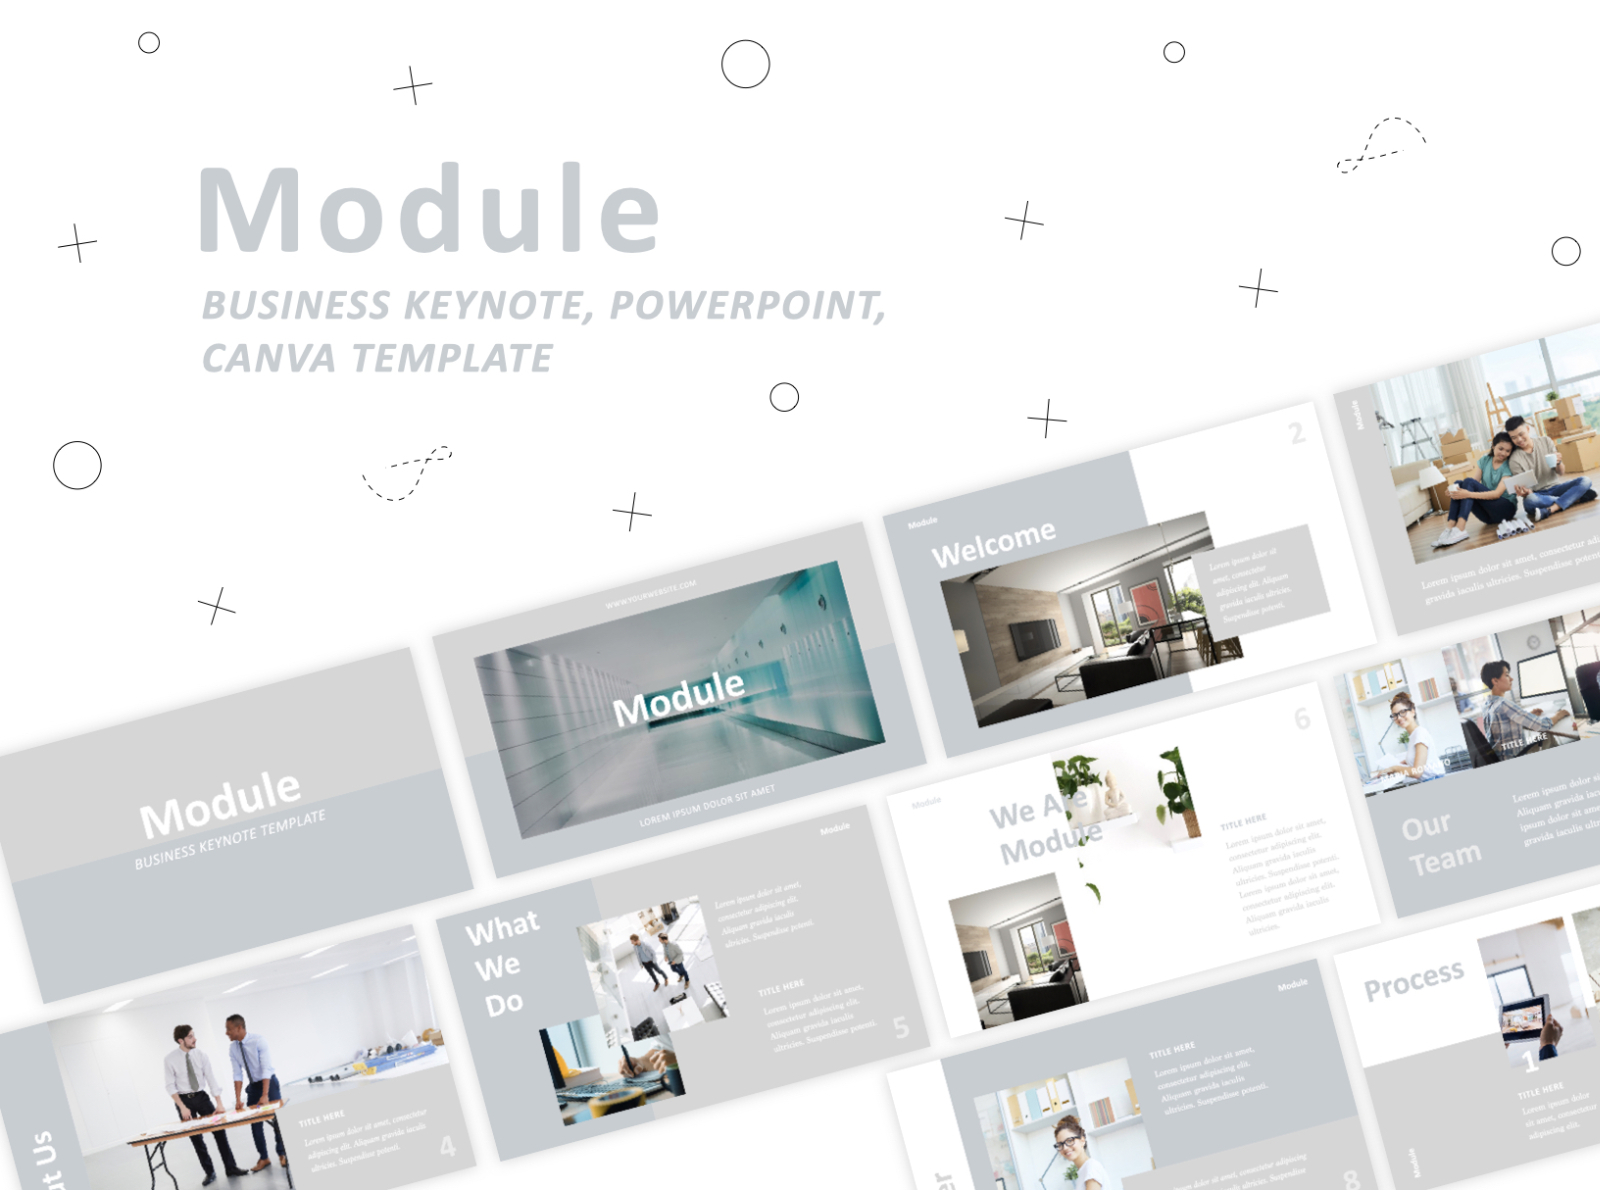 Module - Presentation Templates for Keynote PowerPoint Canva by Uno